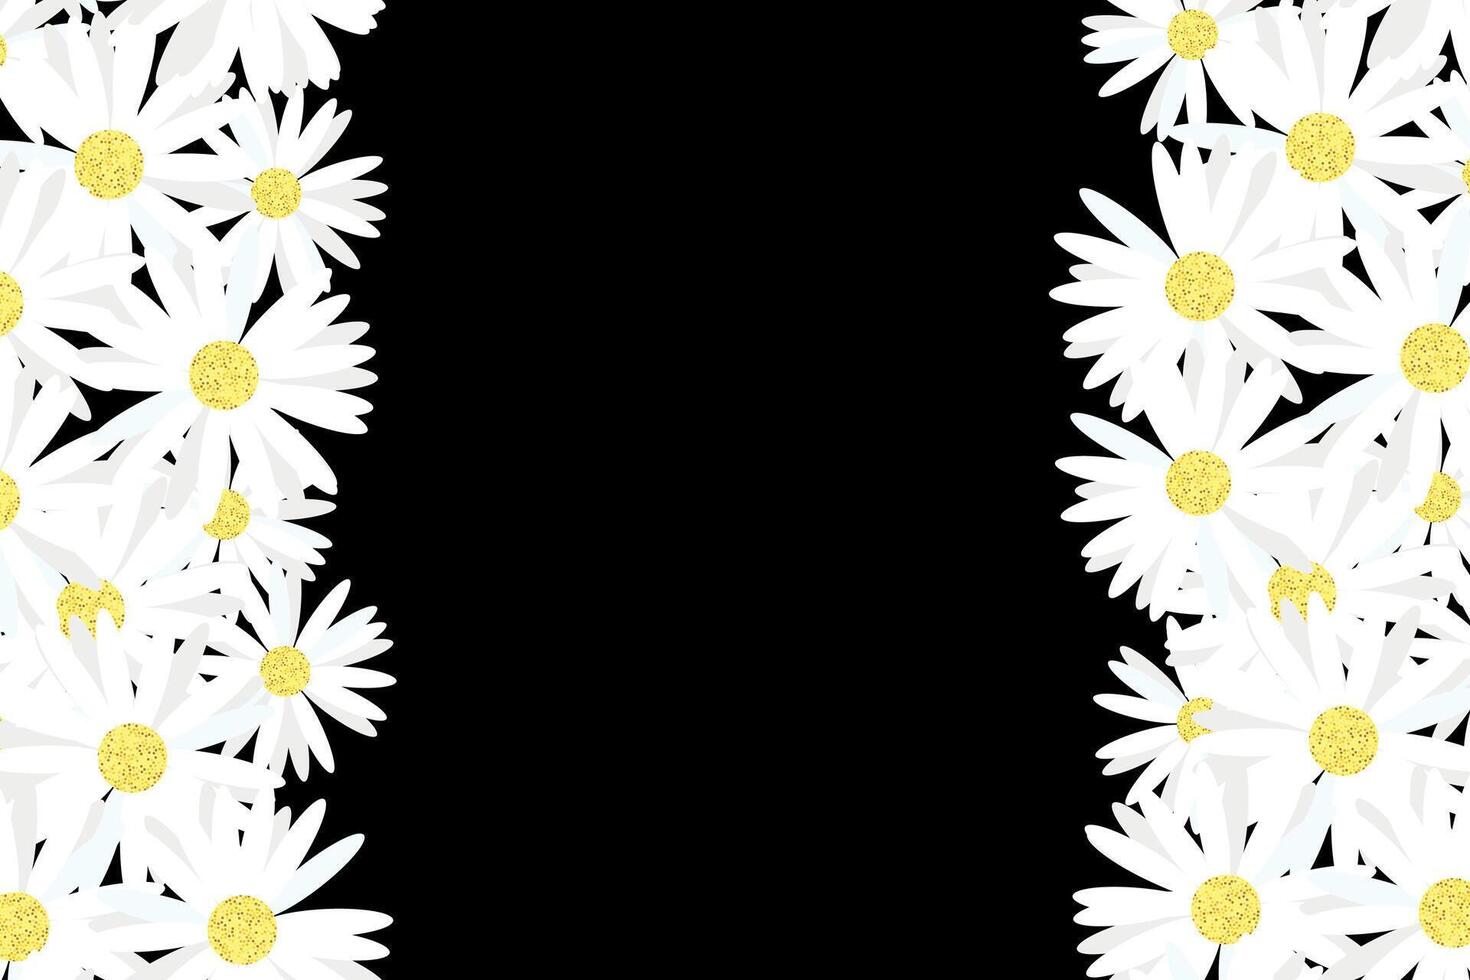 Design with copy space of daisies prepared for advertising vector